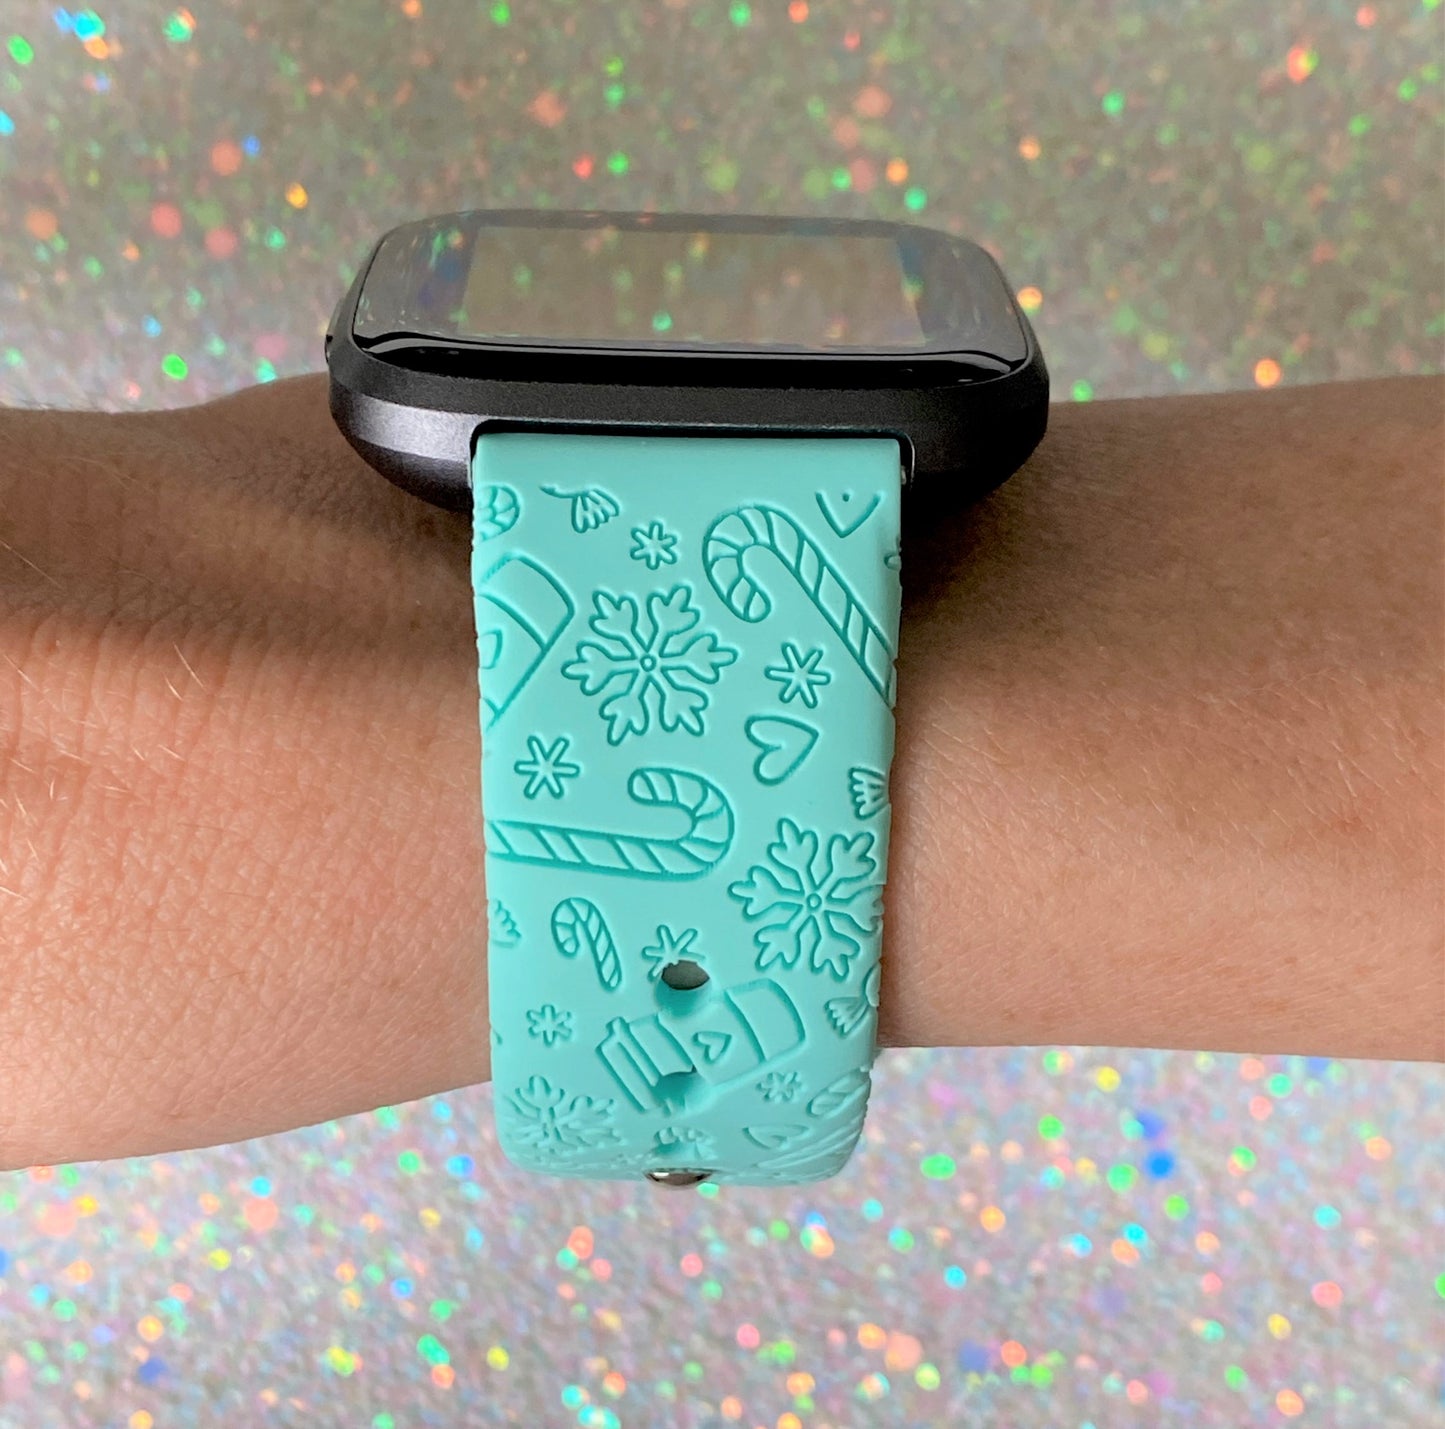 Candy Cane Fitbit Versa 1/2 Watch Band